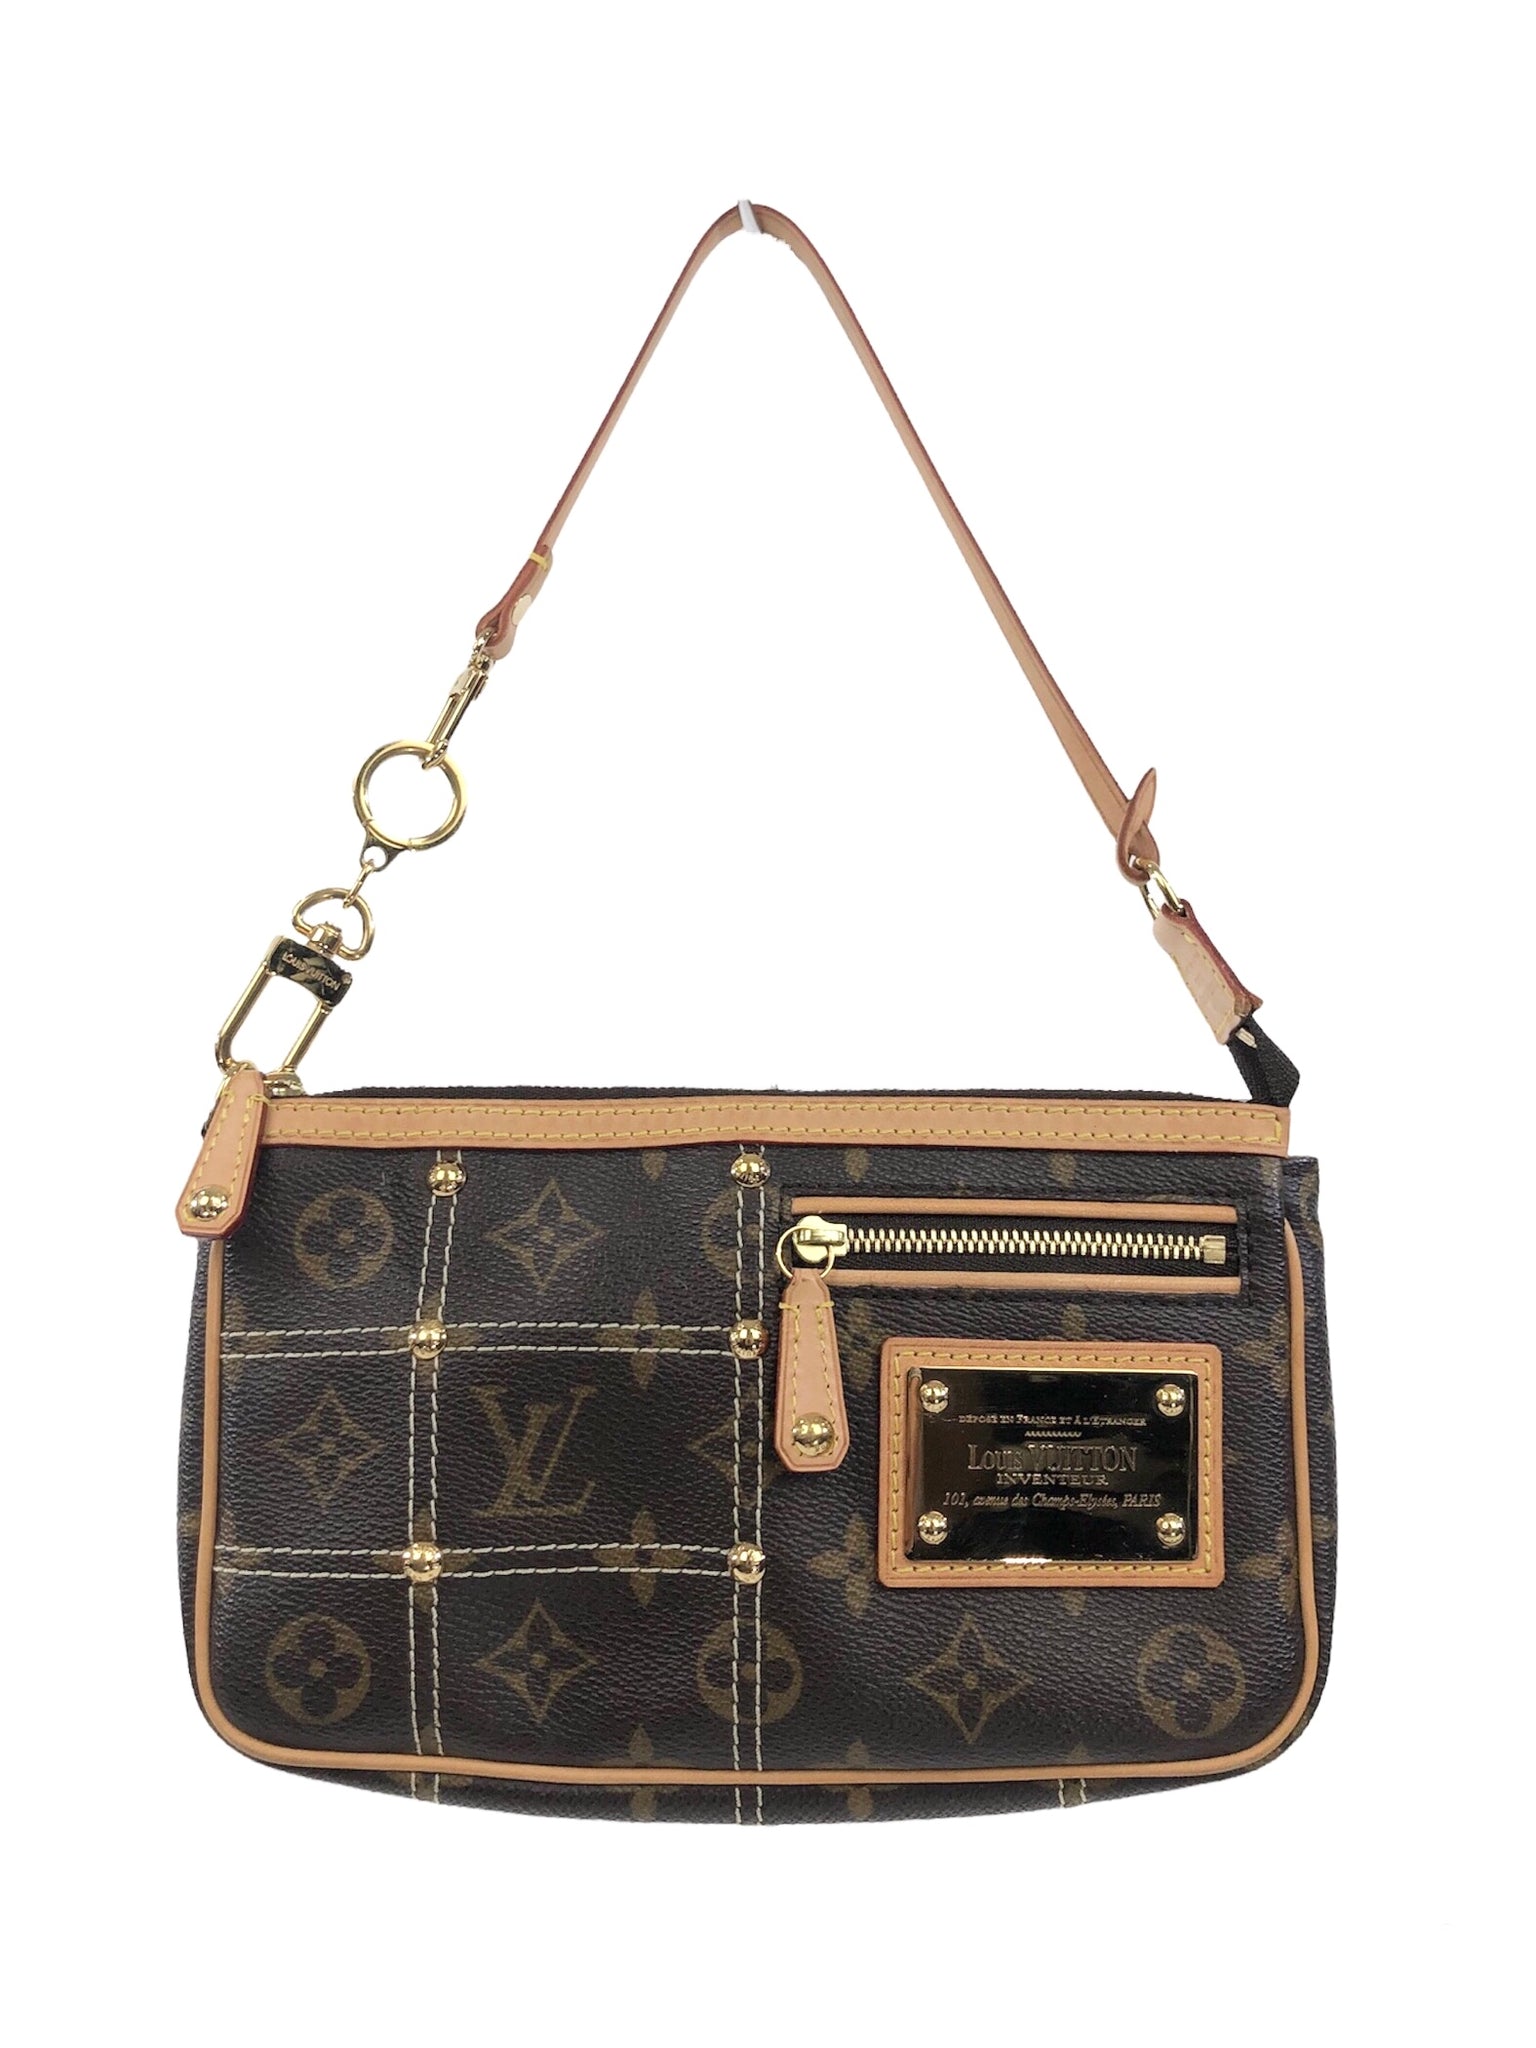 LOUIS VUITTON 'RIVETING BAG' LIMITED EDITION